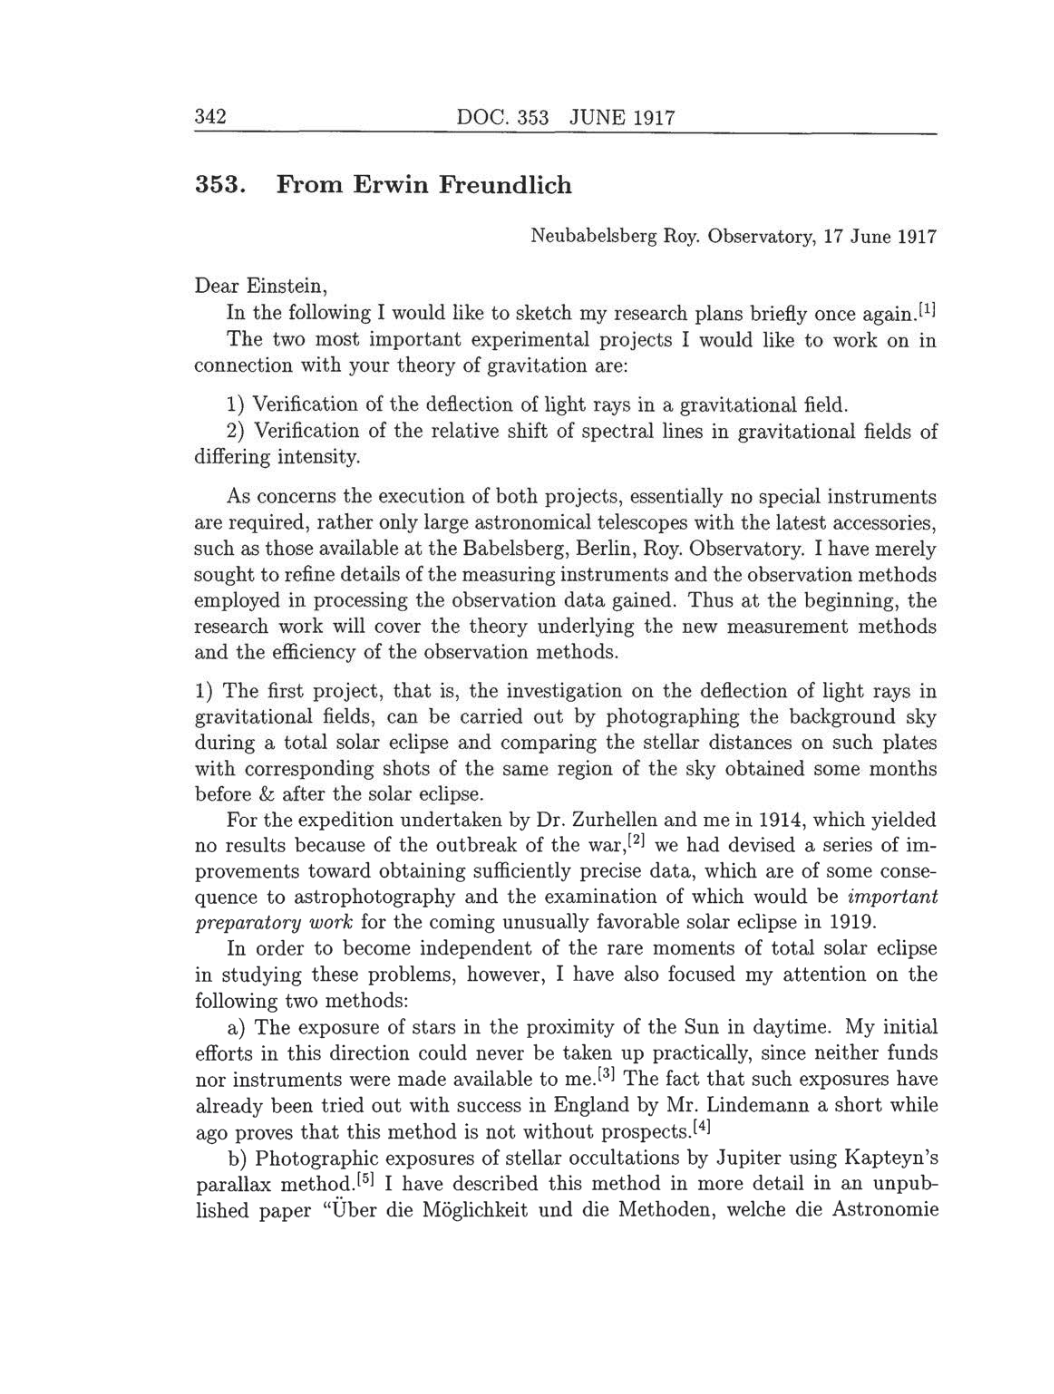 Volume 8: The Berlin Years: Correspondence, 1914-1918 (English translation supplement) page 342